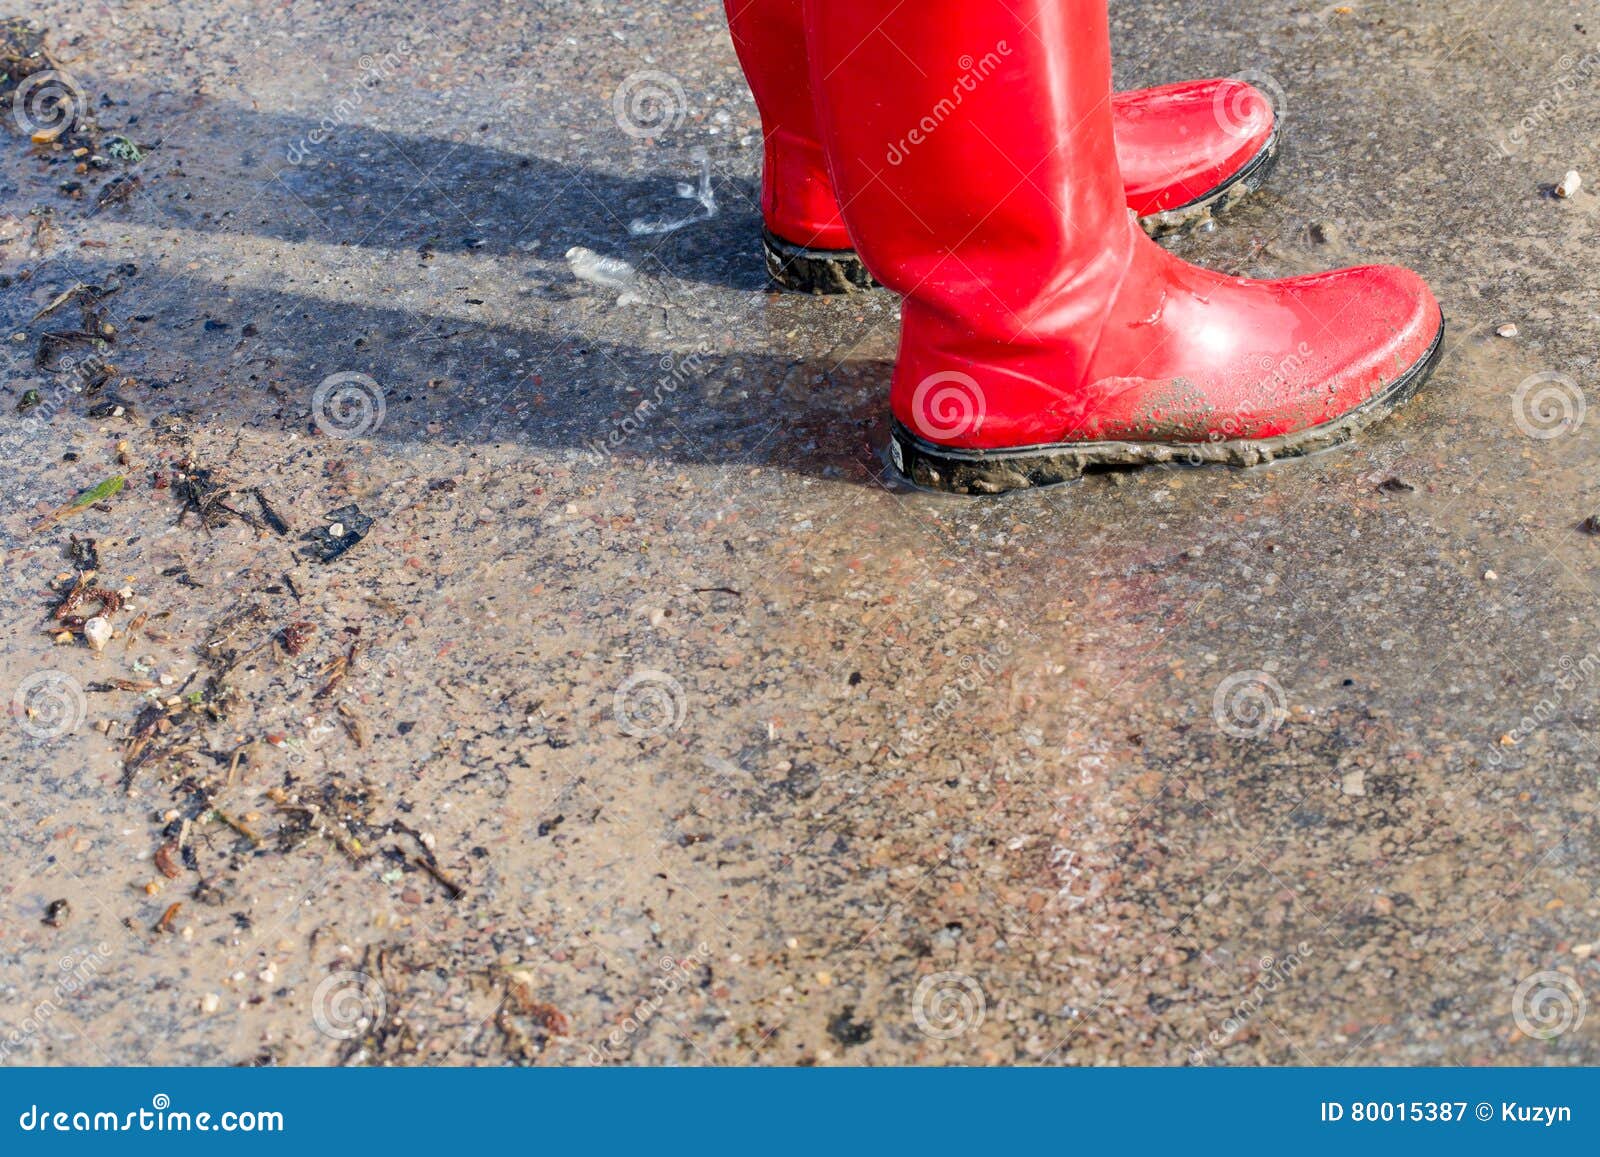 Walk in wellies stock image. Image of delicate, natural - 80015387